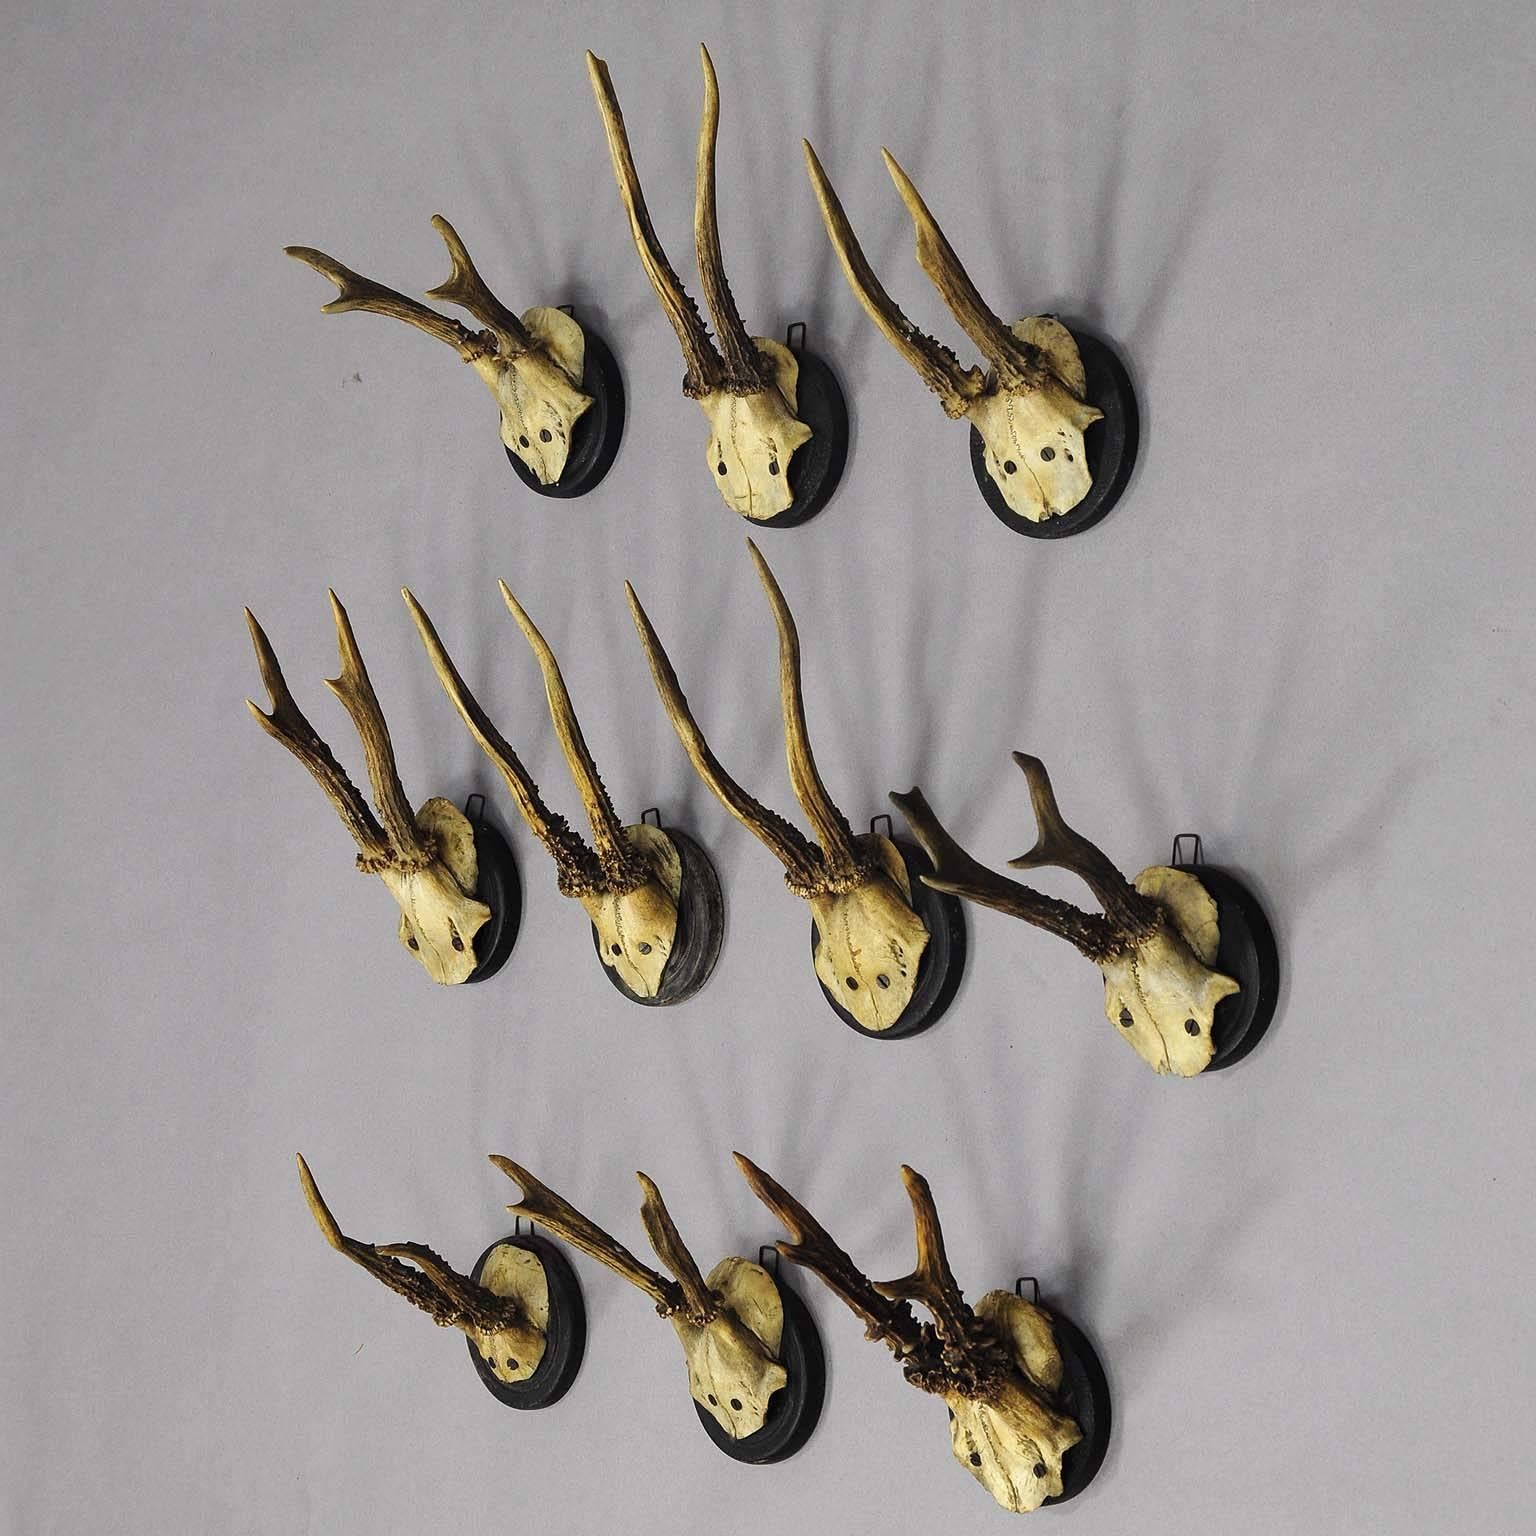 A set of ten antique deer trophies from young deer’s, one abnormal. Mounted on turned and painted wooden plaques. Black forest, Bavaria, circa 1900.